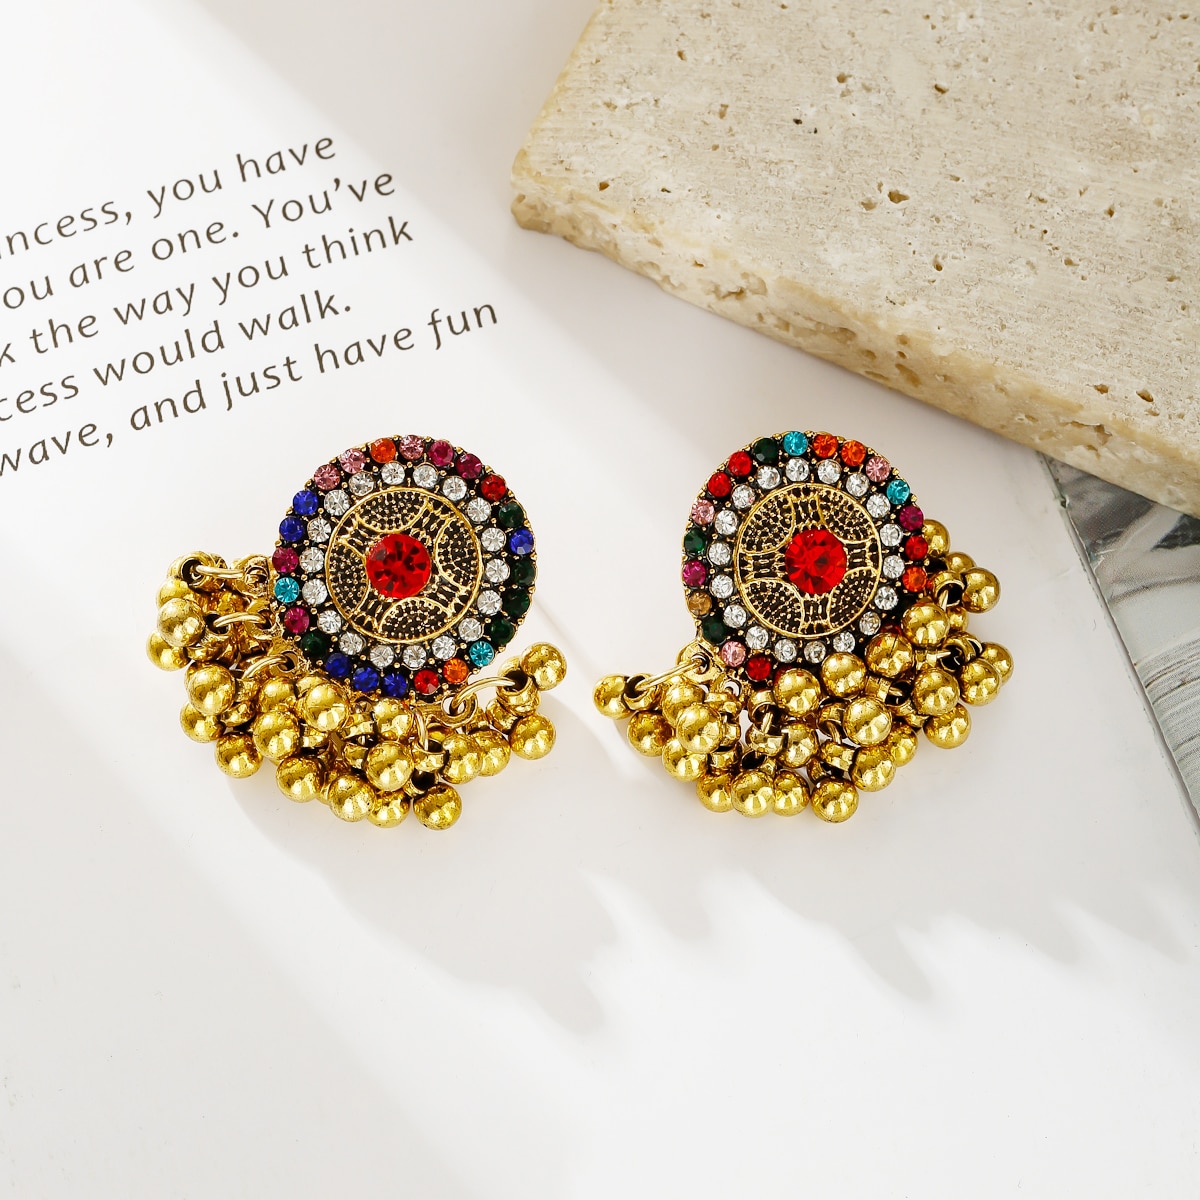 Classic-Ethnic-CZ-Indian-Earrings-For-Women-Gypsy-Round-Alloy-Jhumka-Earring-Fashion-Jewelry-Orecchi-3256804584391767-4